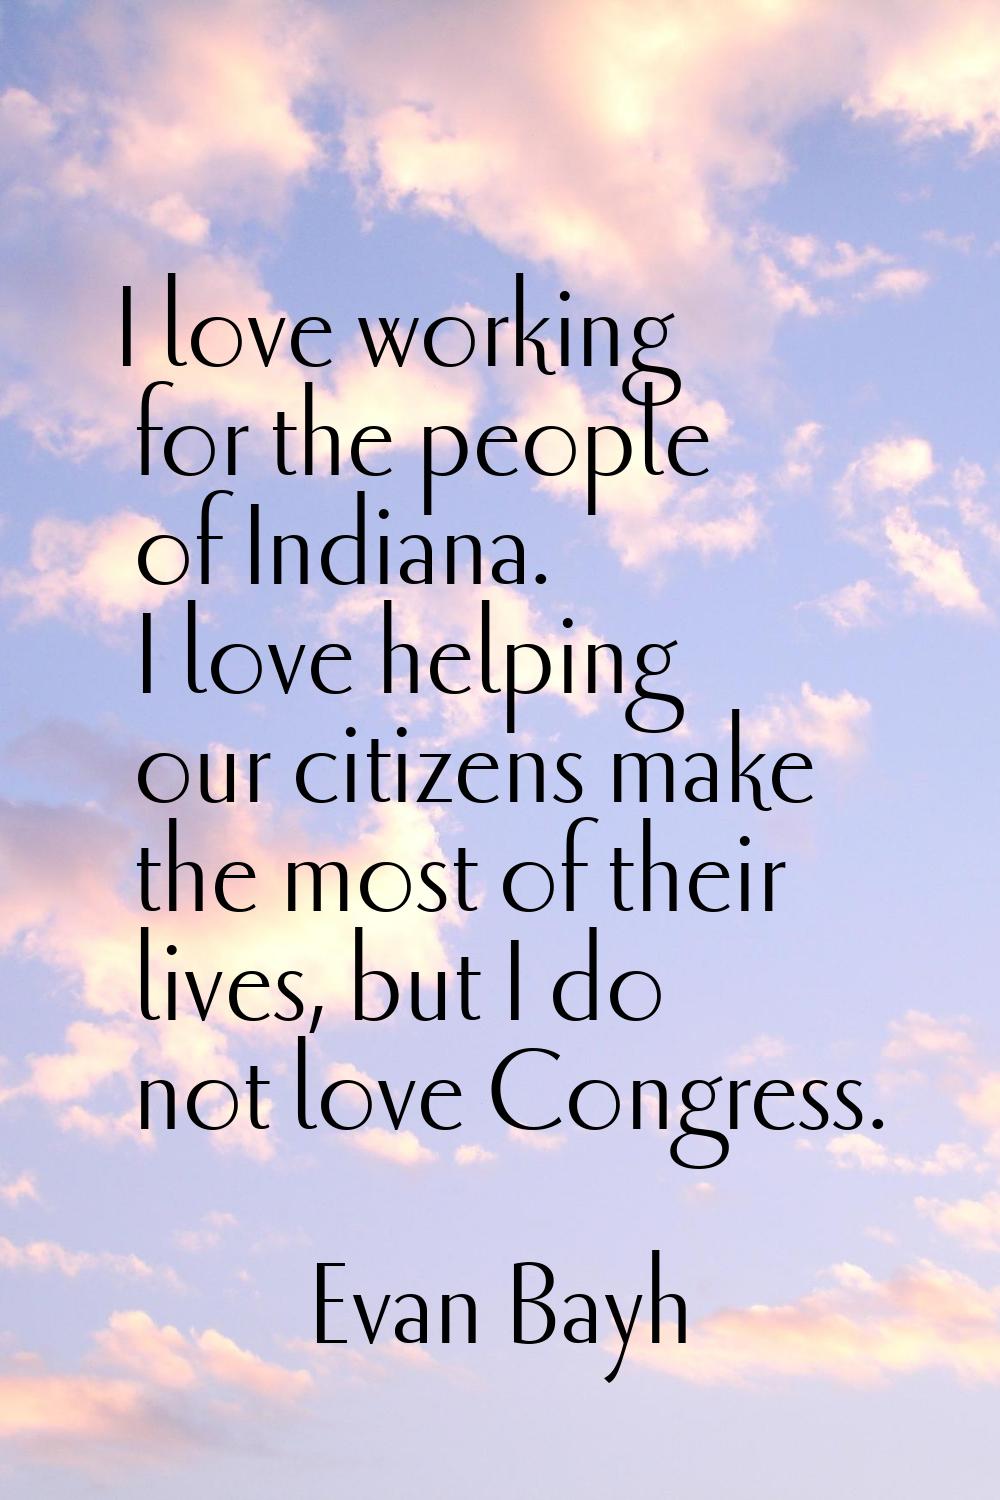 I love working for the people of Indiana. I love helping our citizens make the most of their lives,